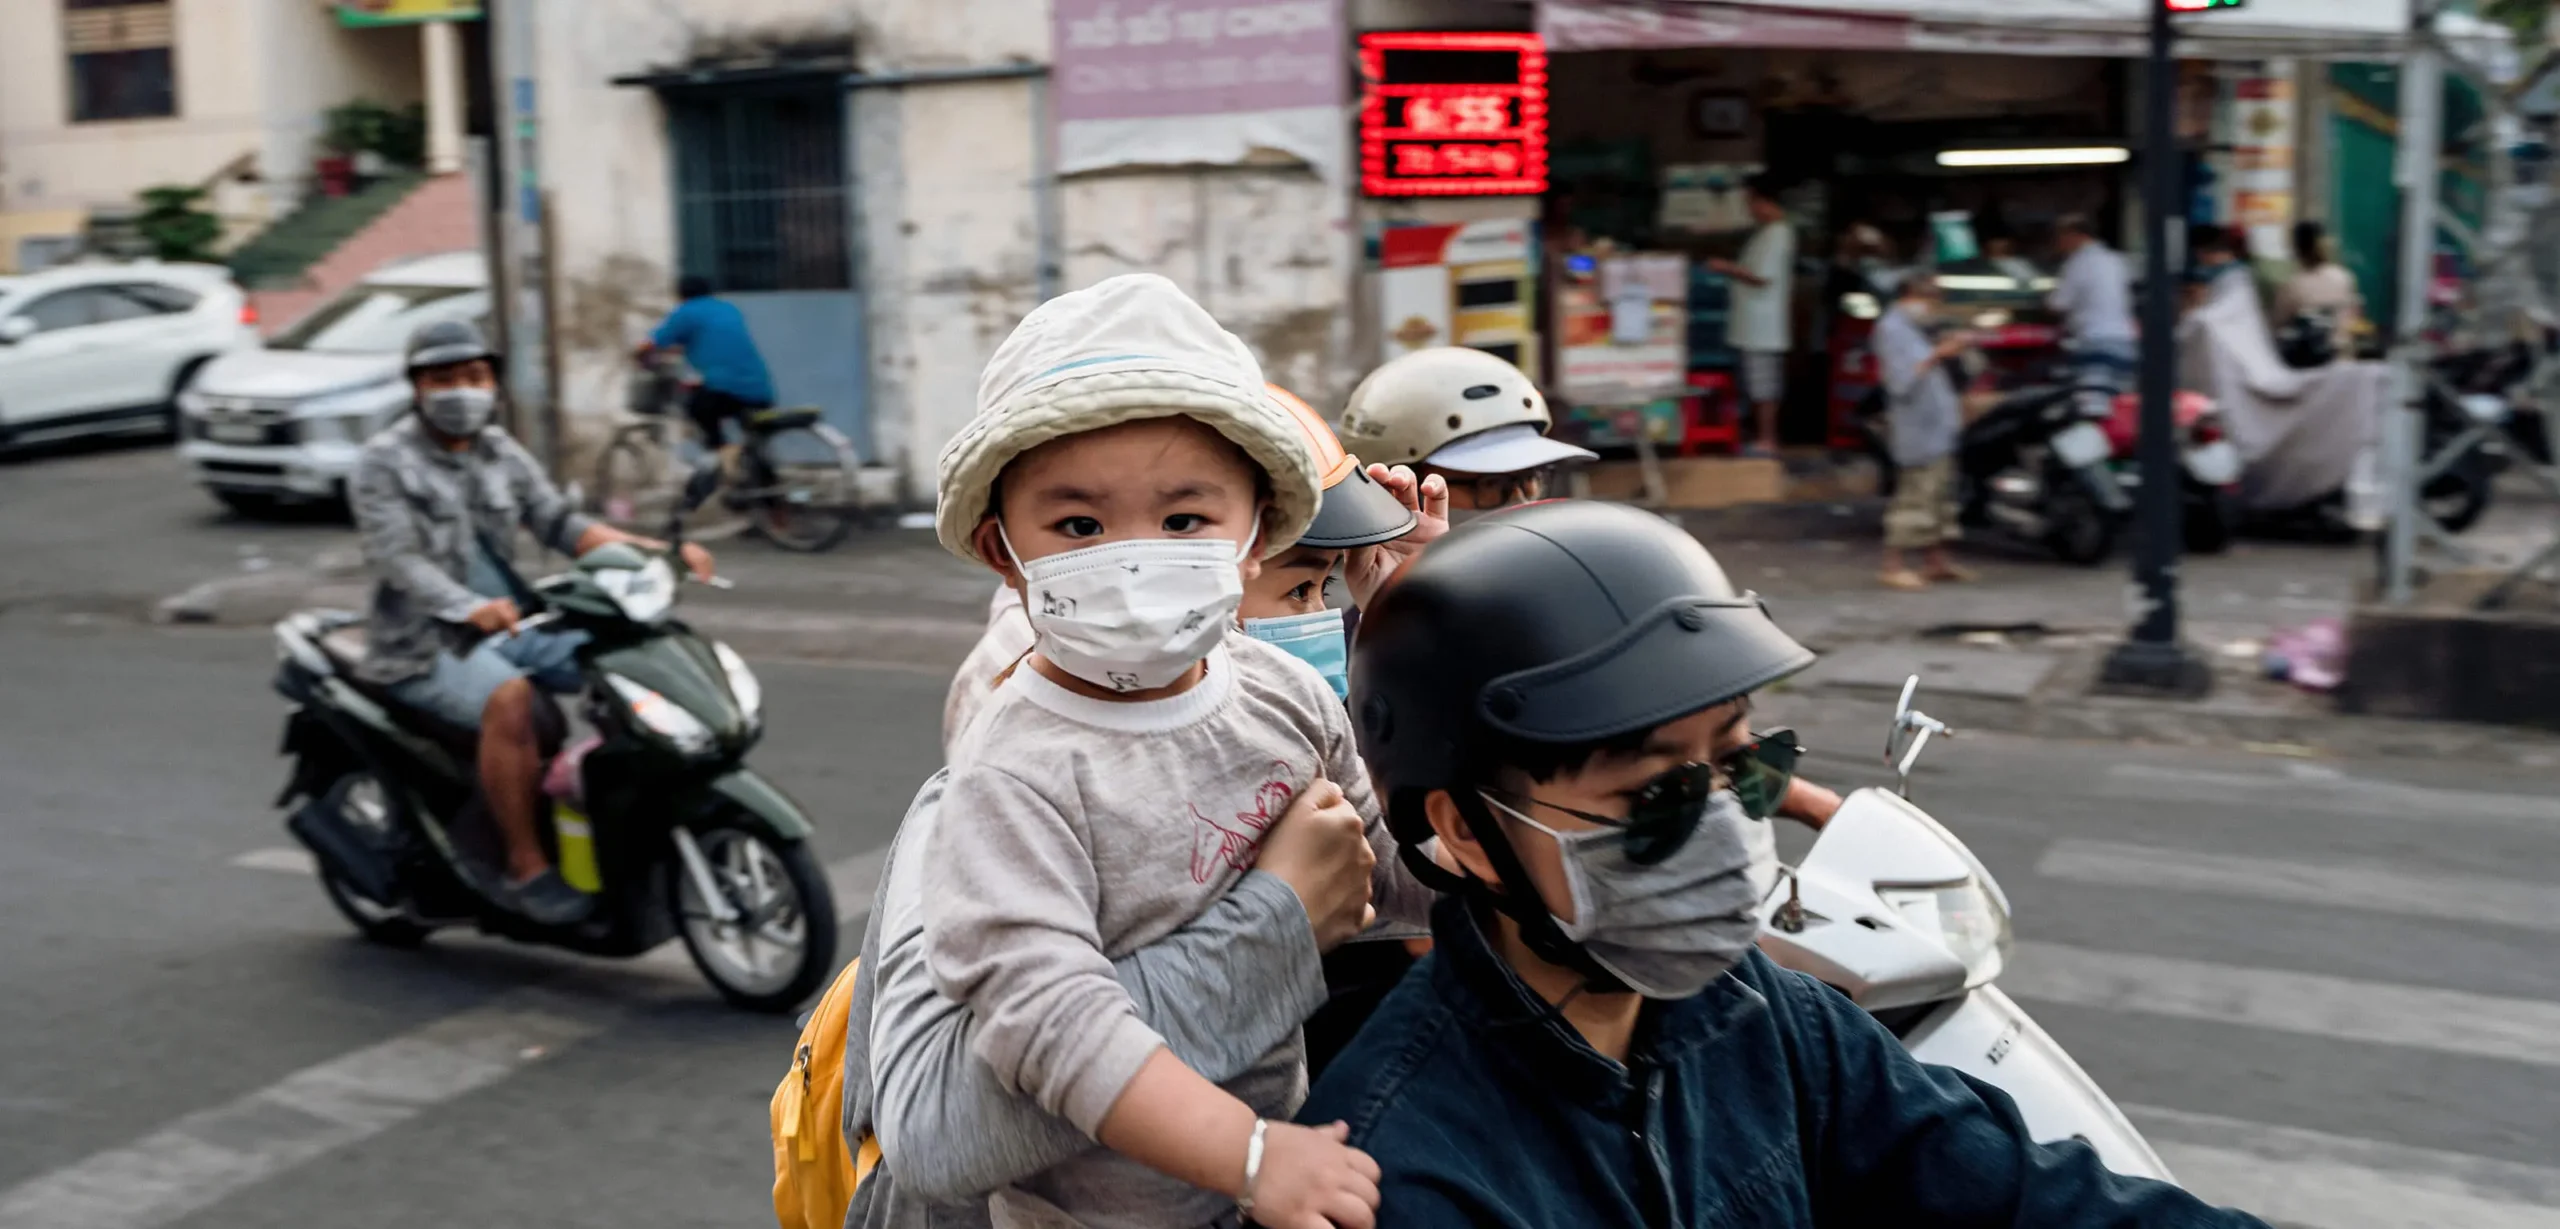 Street scene during the COVID-19 pandemic in Ho Chi Minh City, Vietnam